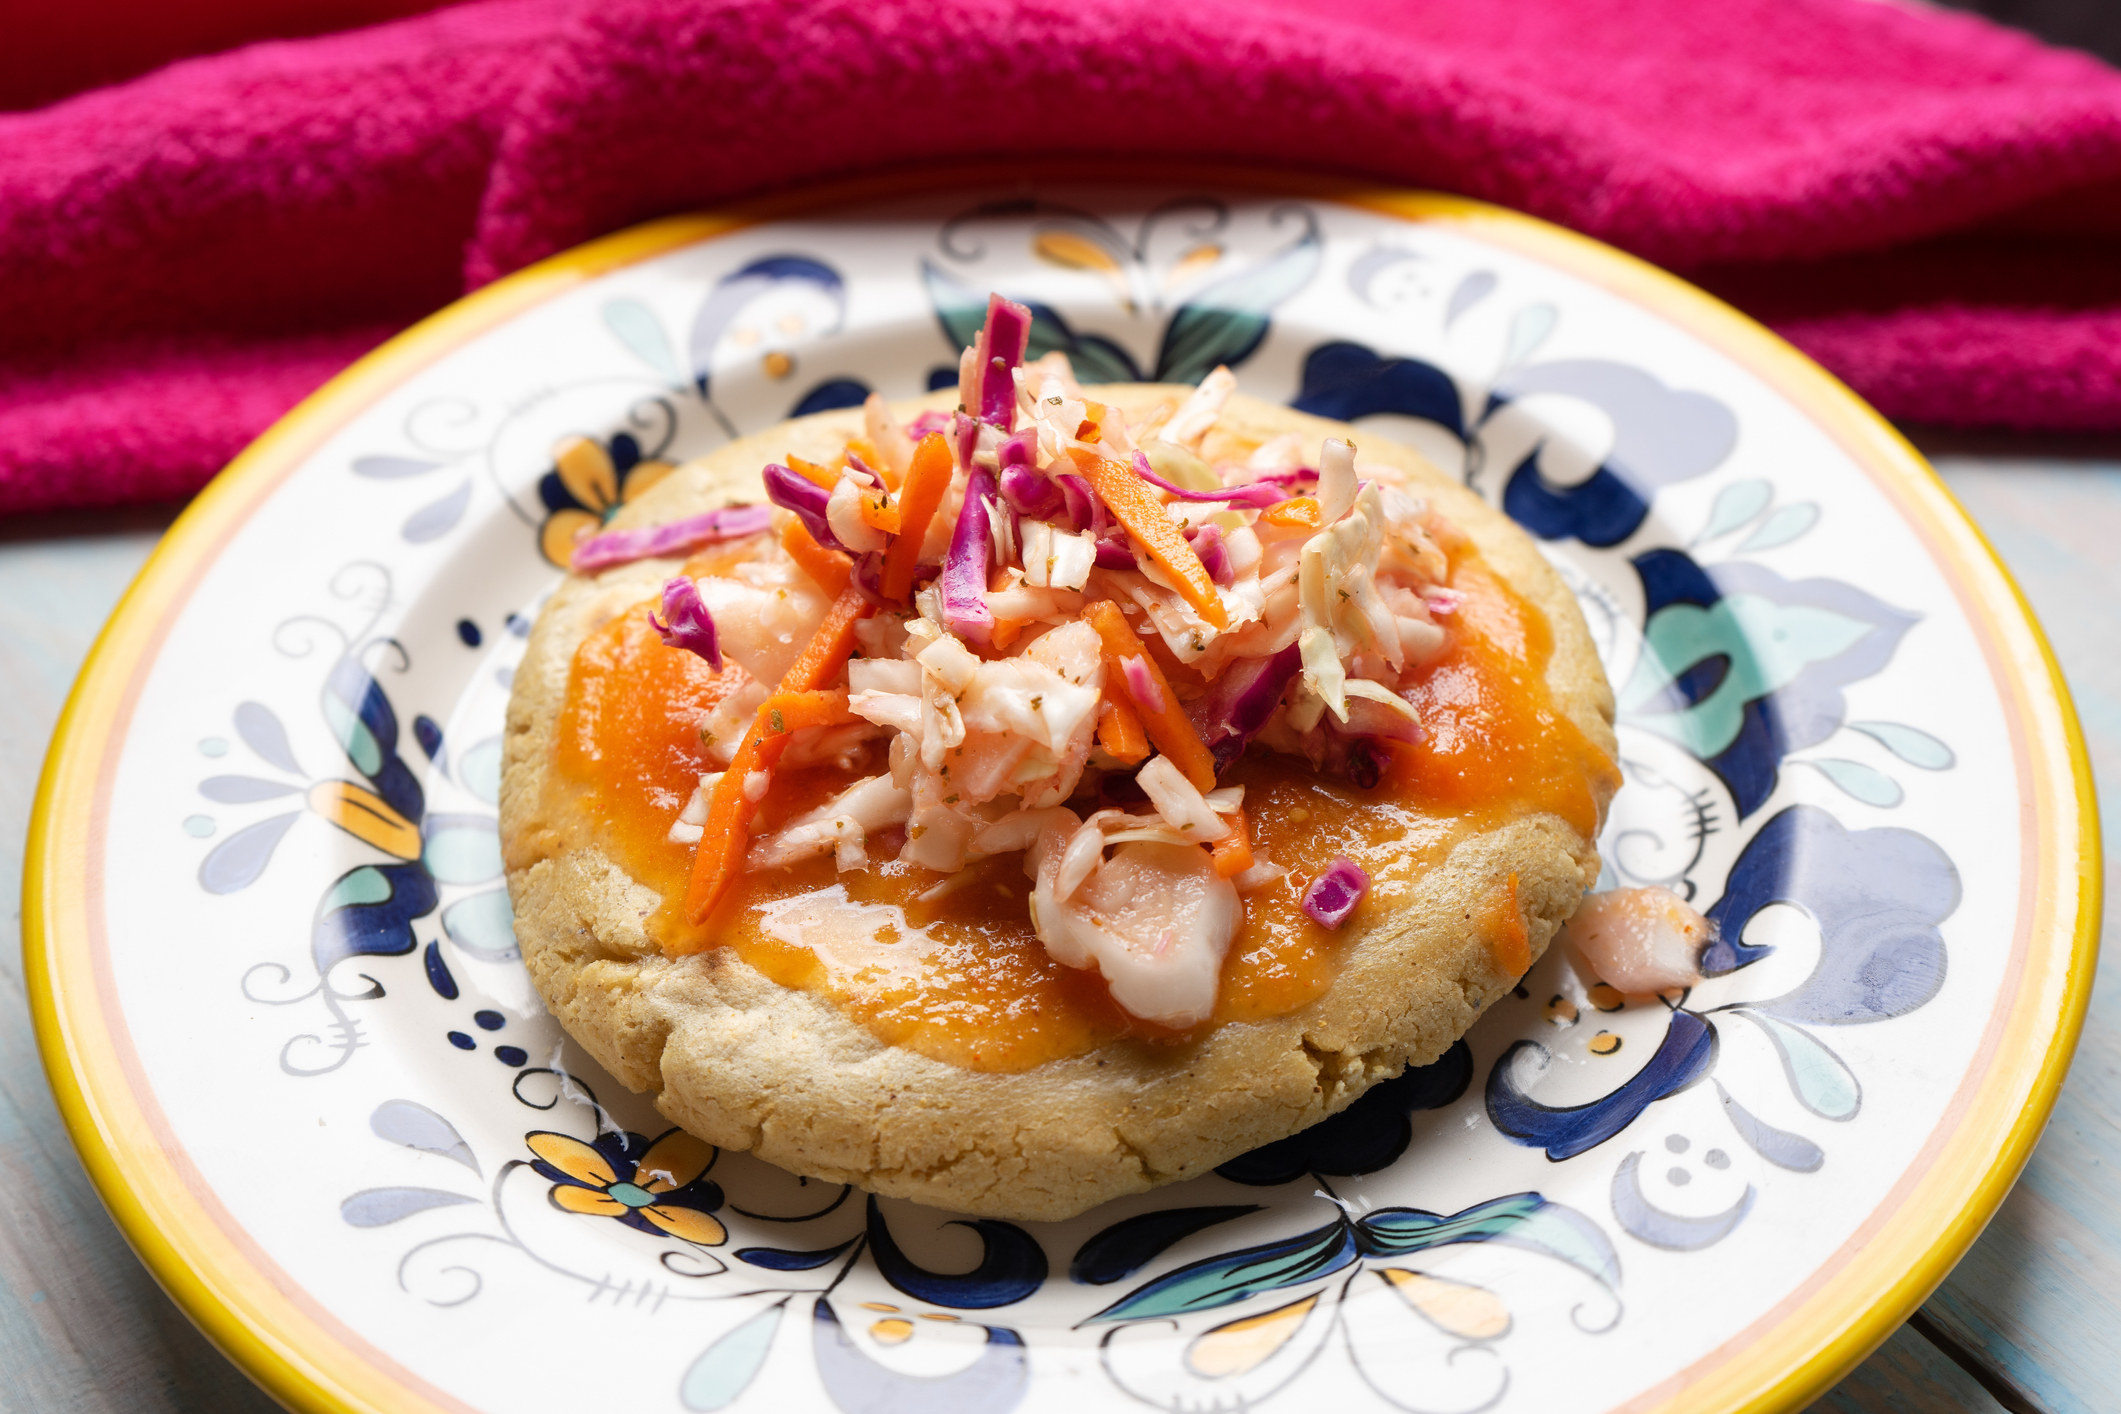 A plate containing a Salvadorian pupusa with pickled cabbage.